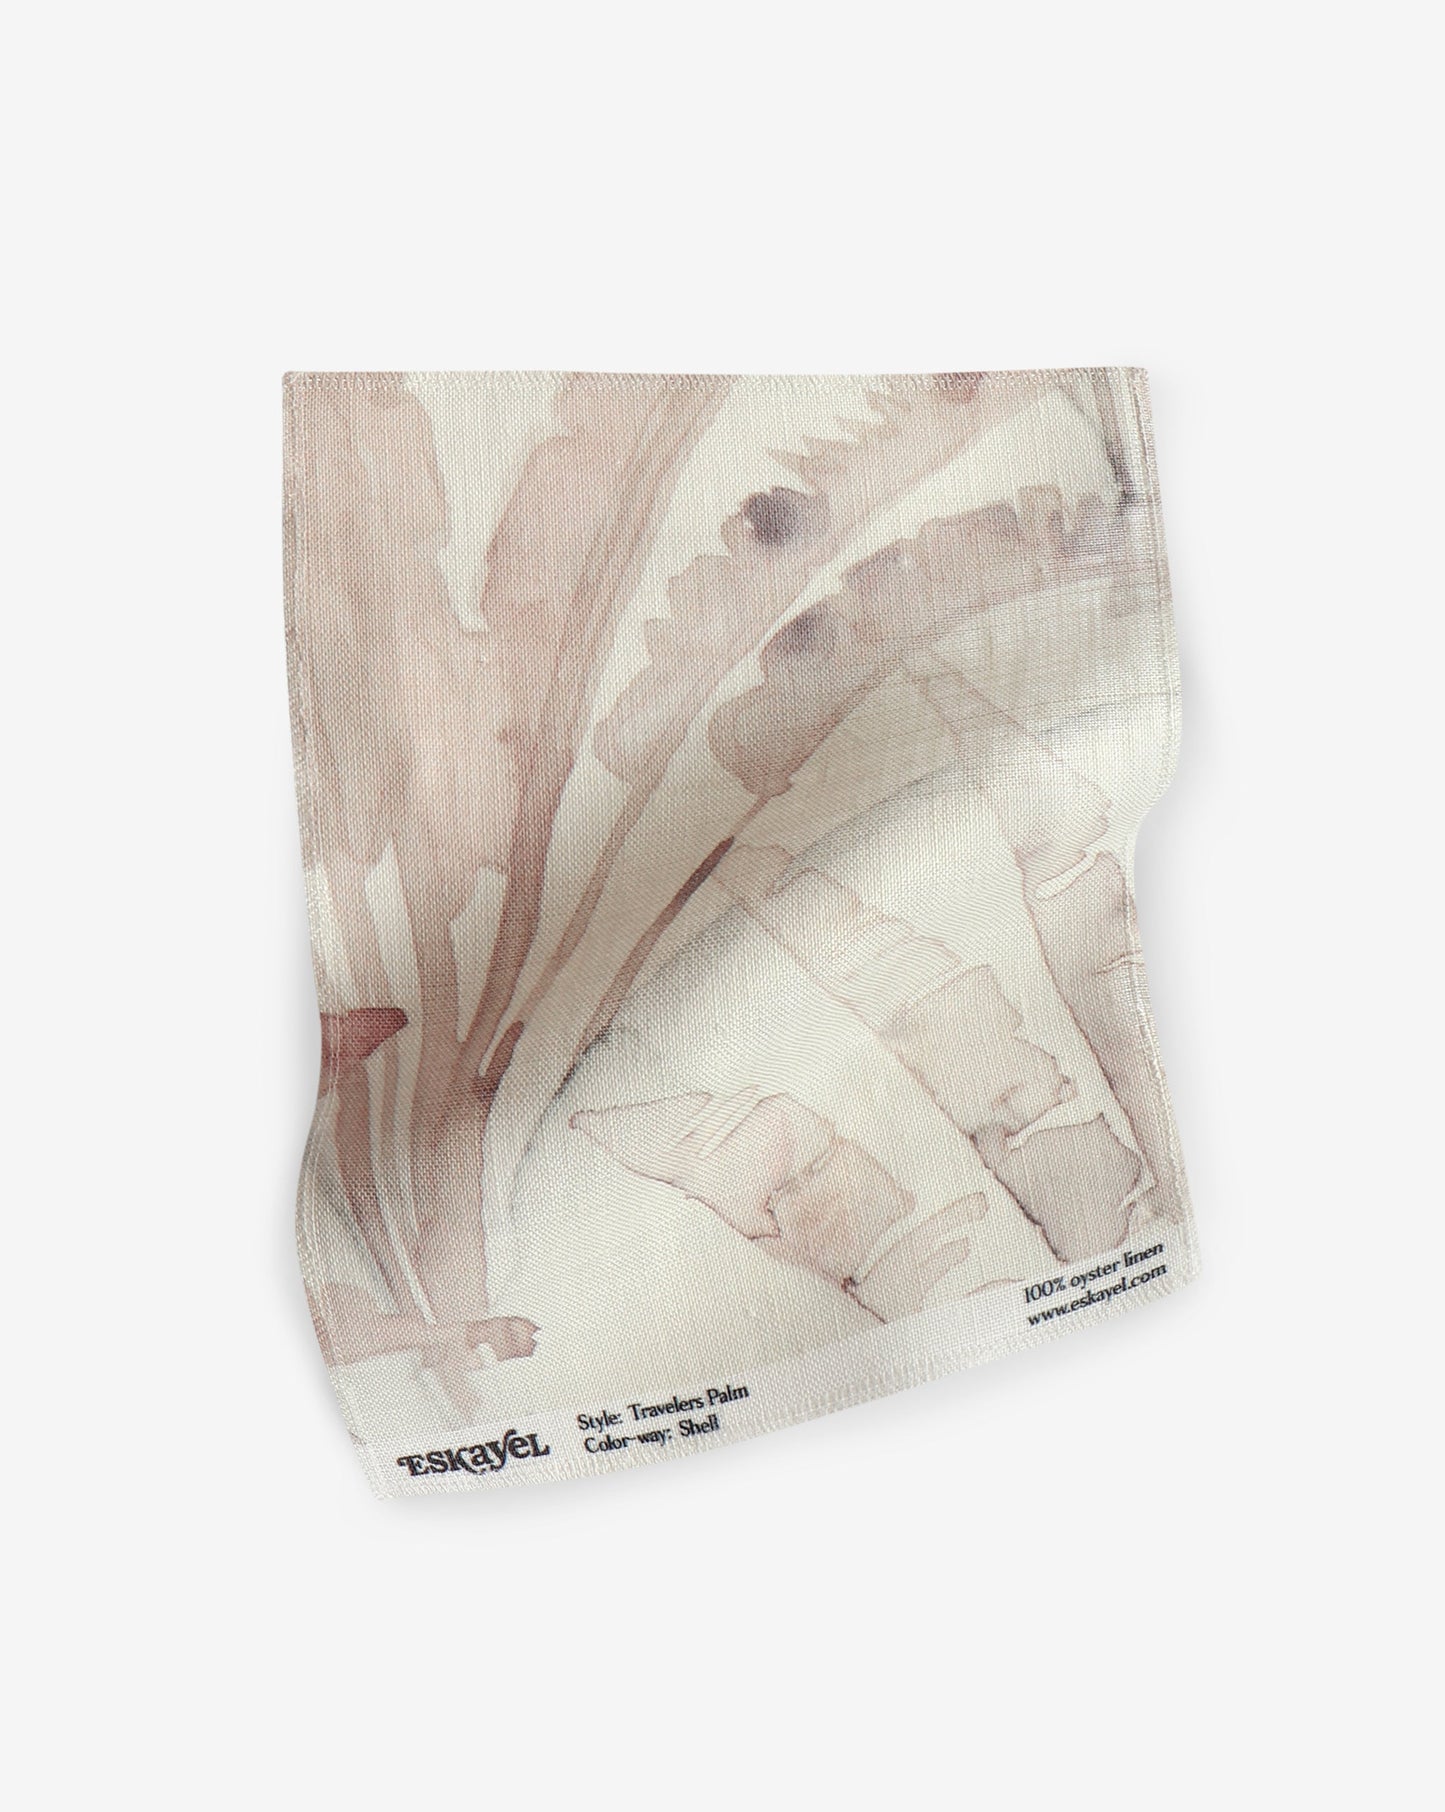 To a Travelers Palm Fabric Sample Shell with a pink and white design on it